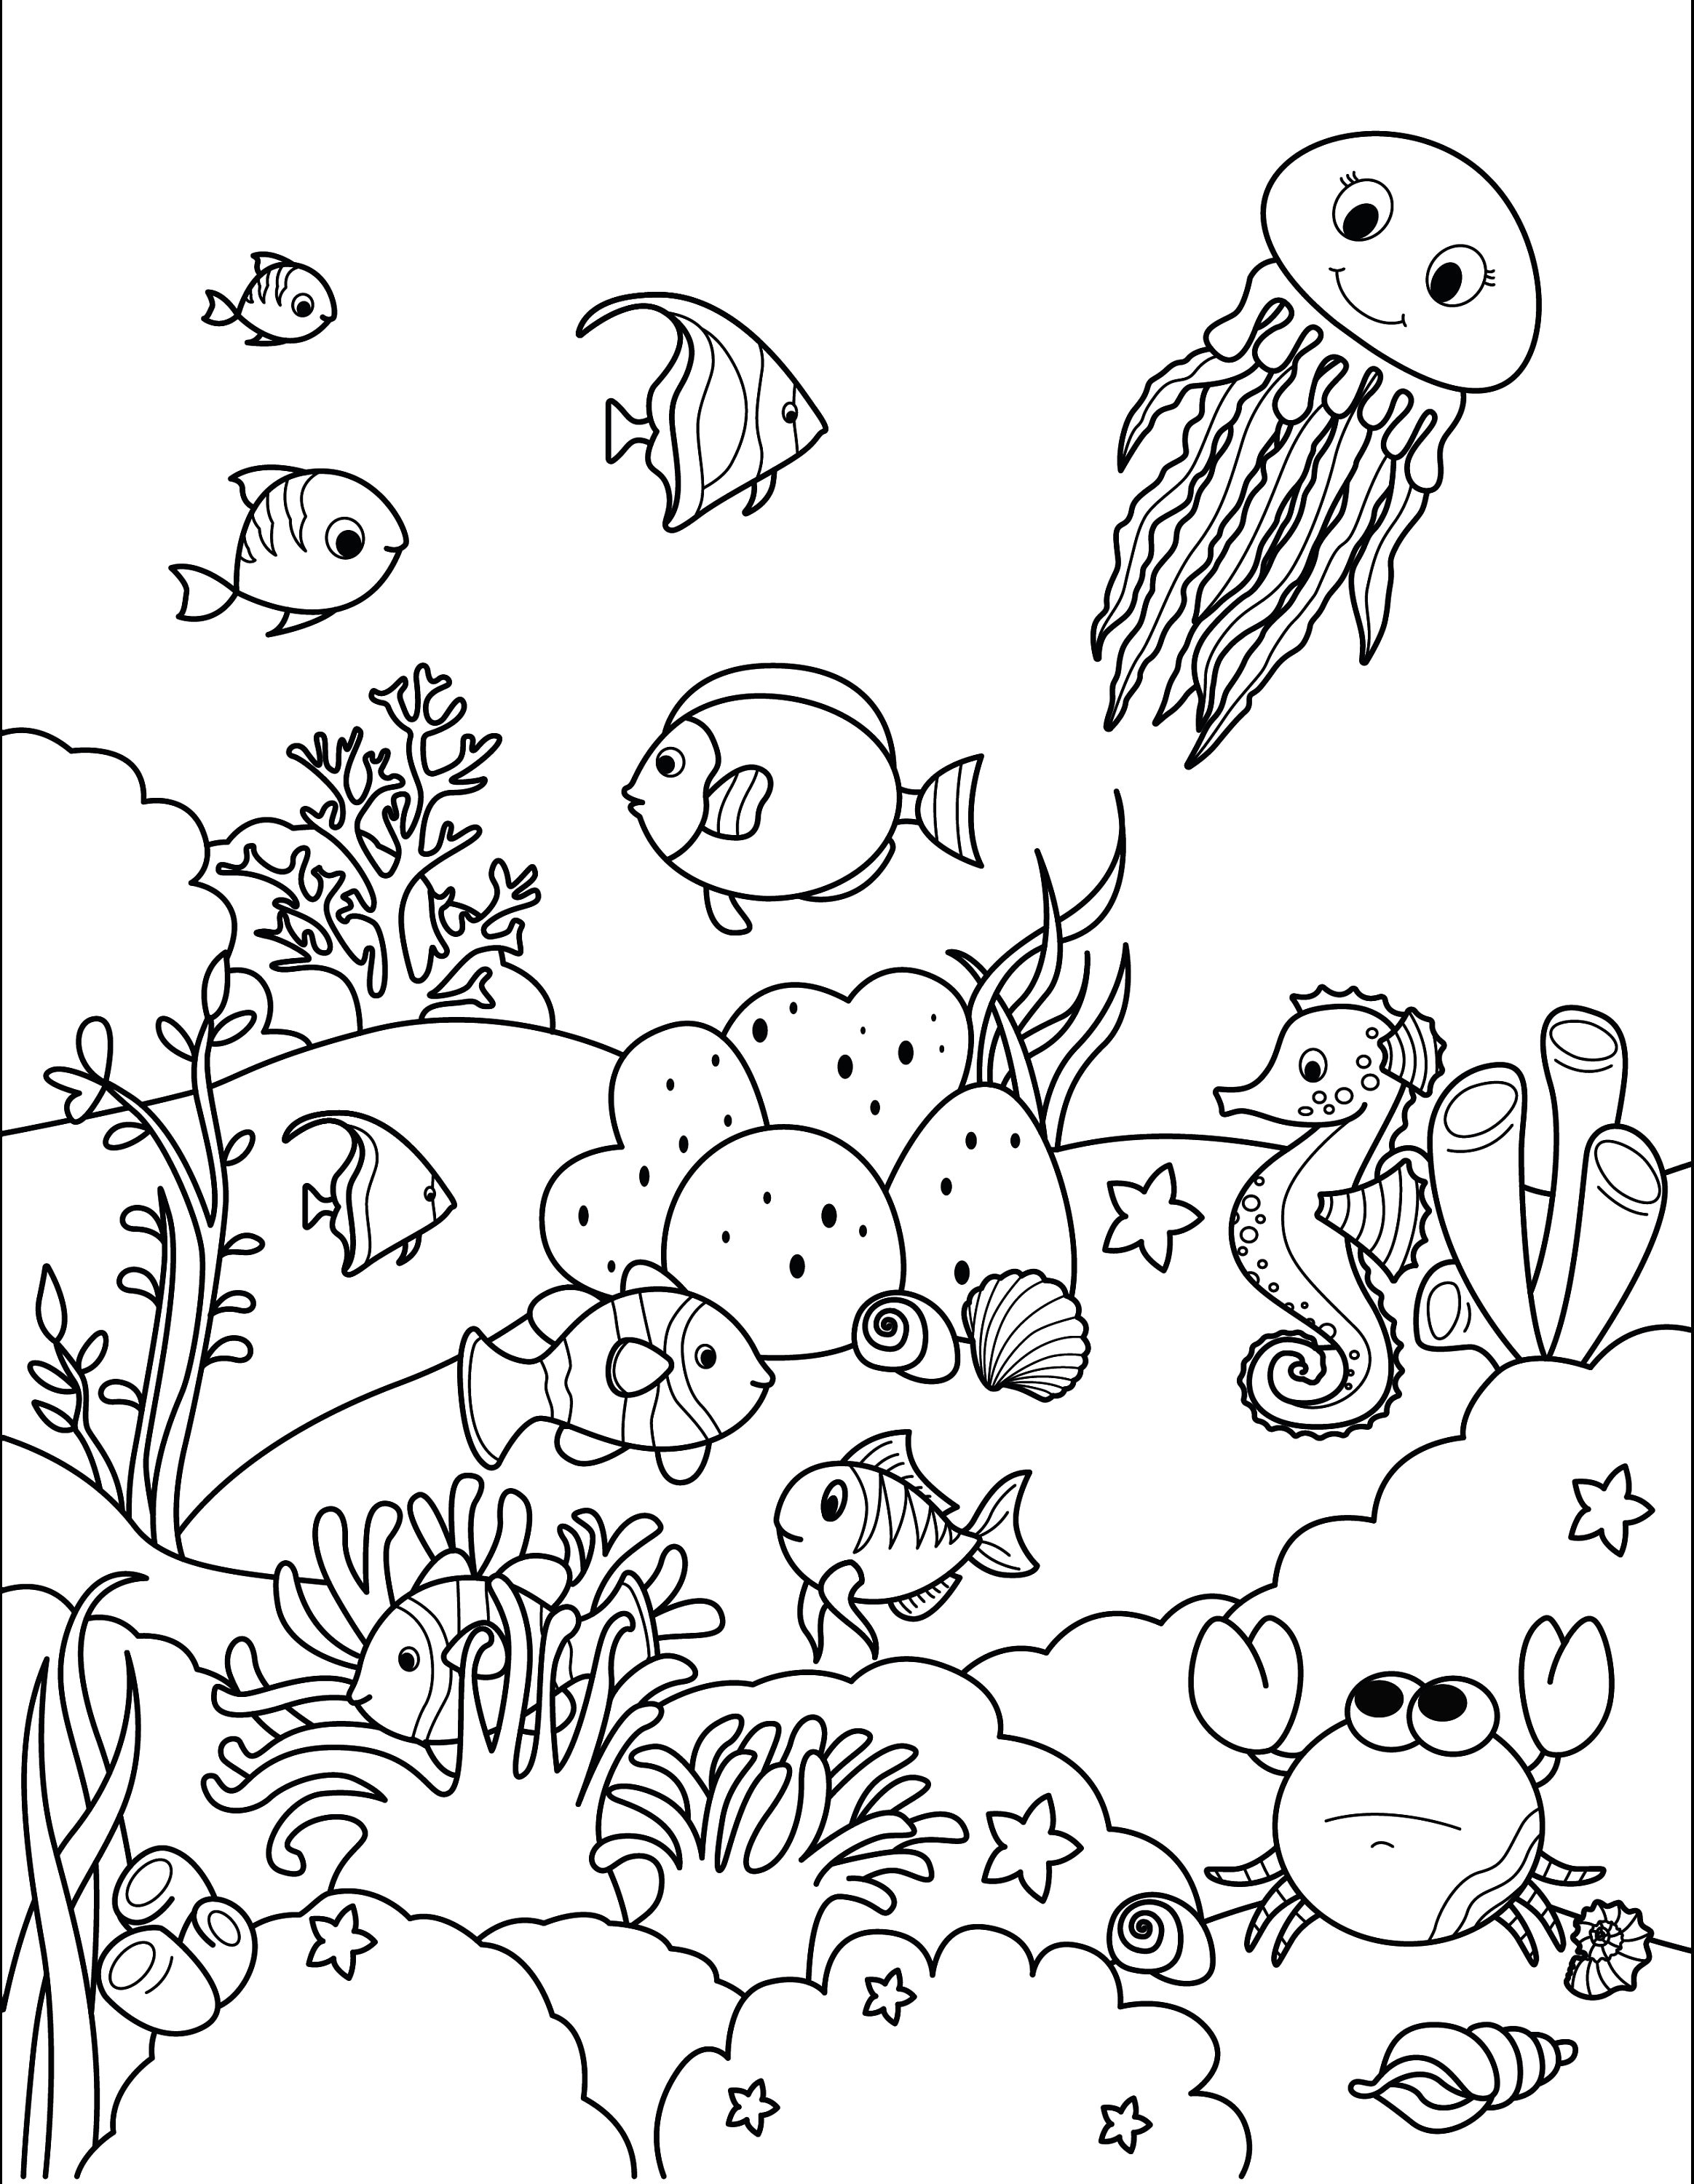 Ocean Animal Number Big Coloring Poster For Kids 30*90cm Children Coloring Drawing  Paper Roll Early Educational - Coloring Book Set - AliExpress